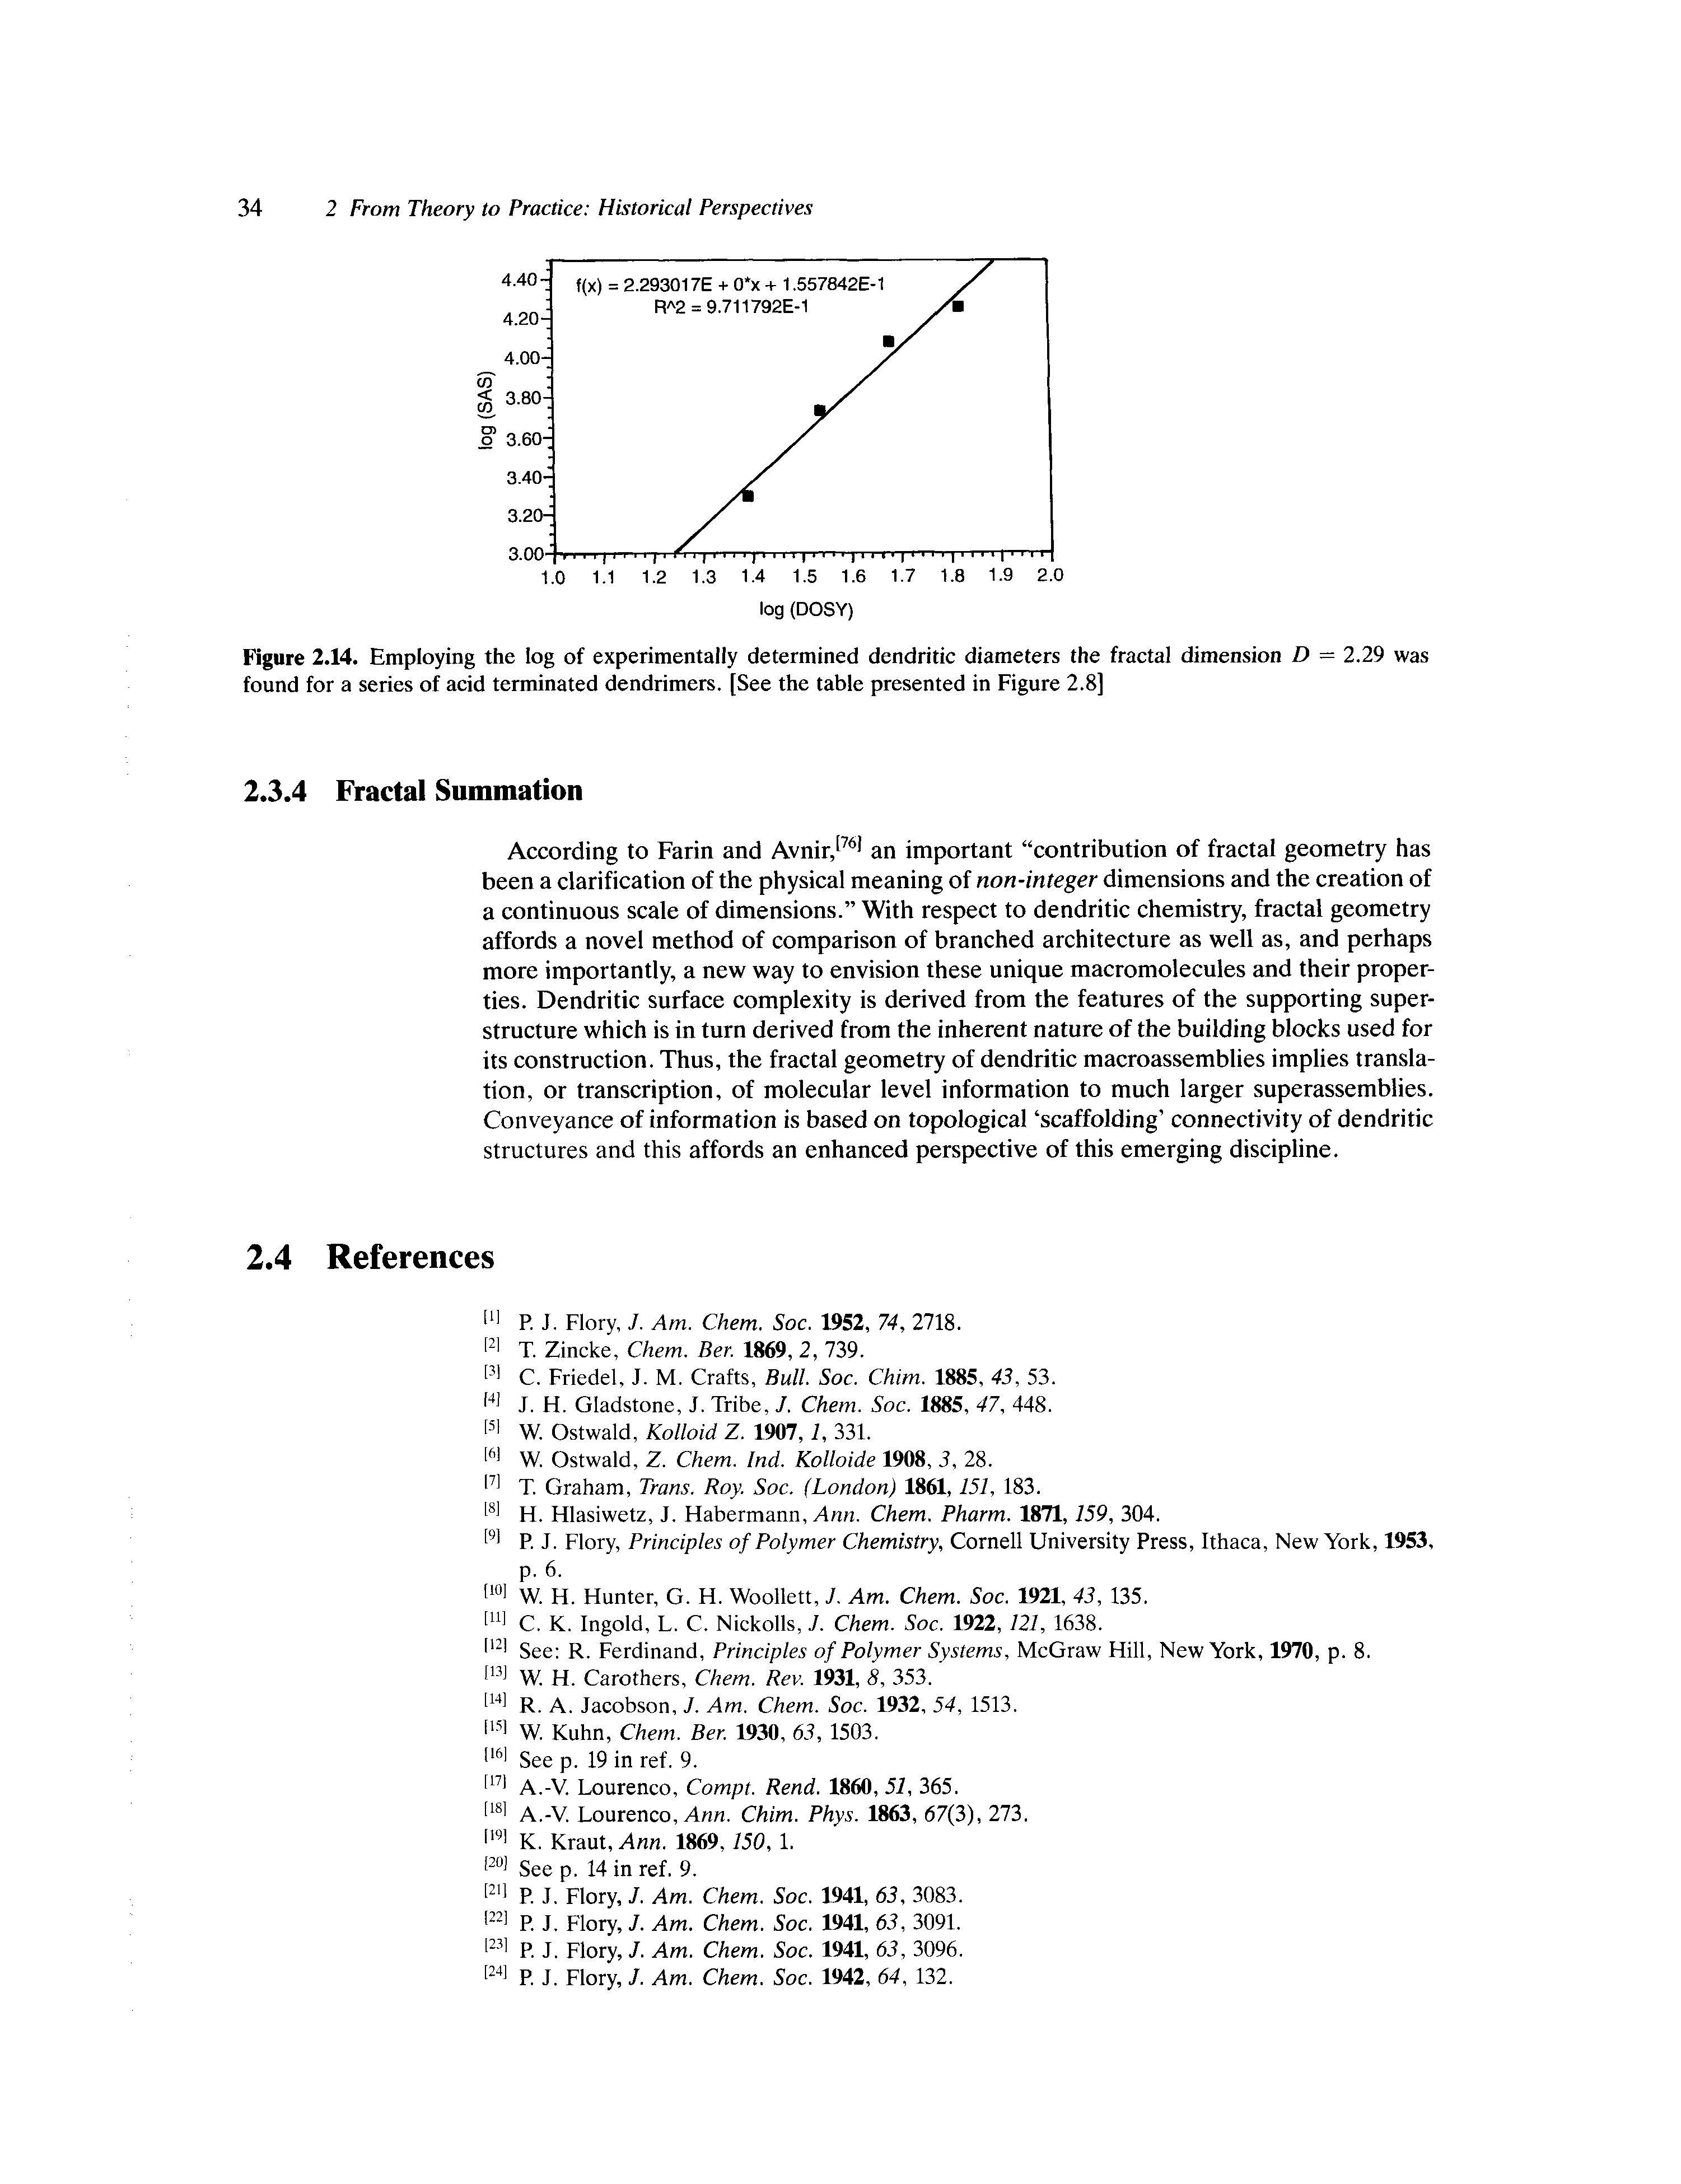 Figure 2.14. Employing the log of experimentally determined dendritic diameters the fractal dimension D — 2.29 was found for a series of acid terminated dendrimers. [See the table presented in Figure 2.8]...